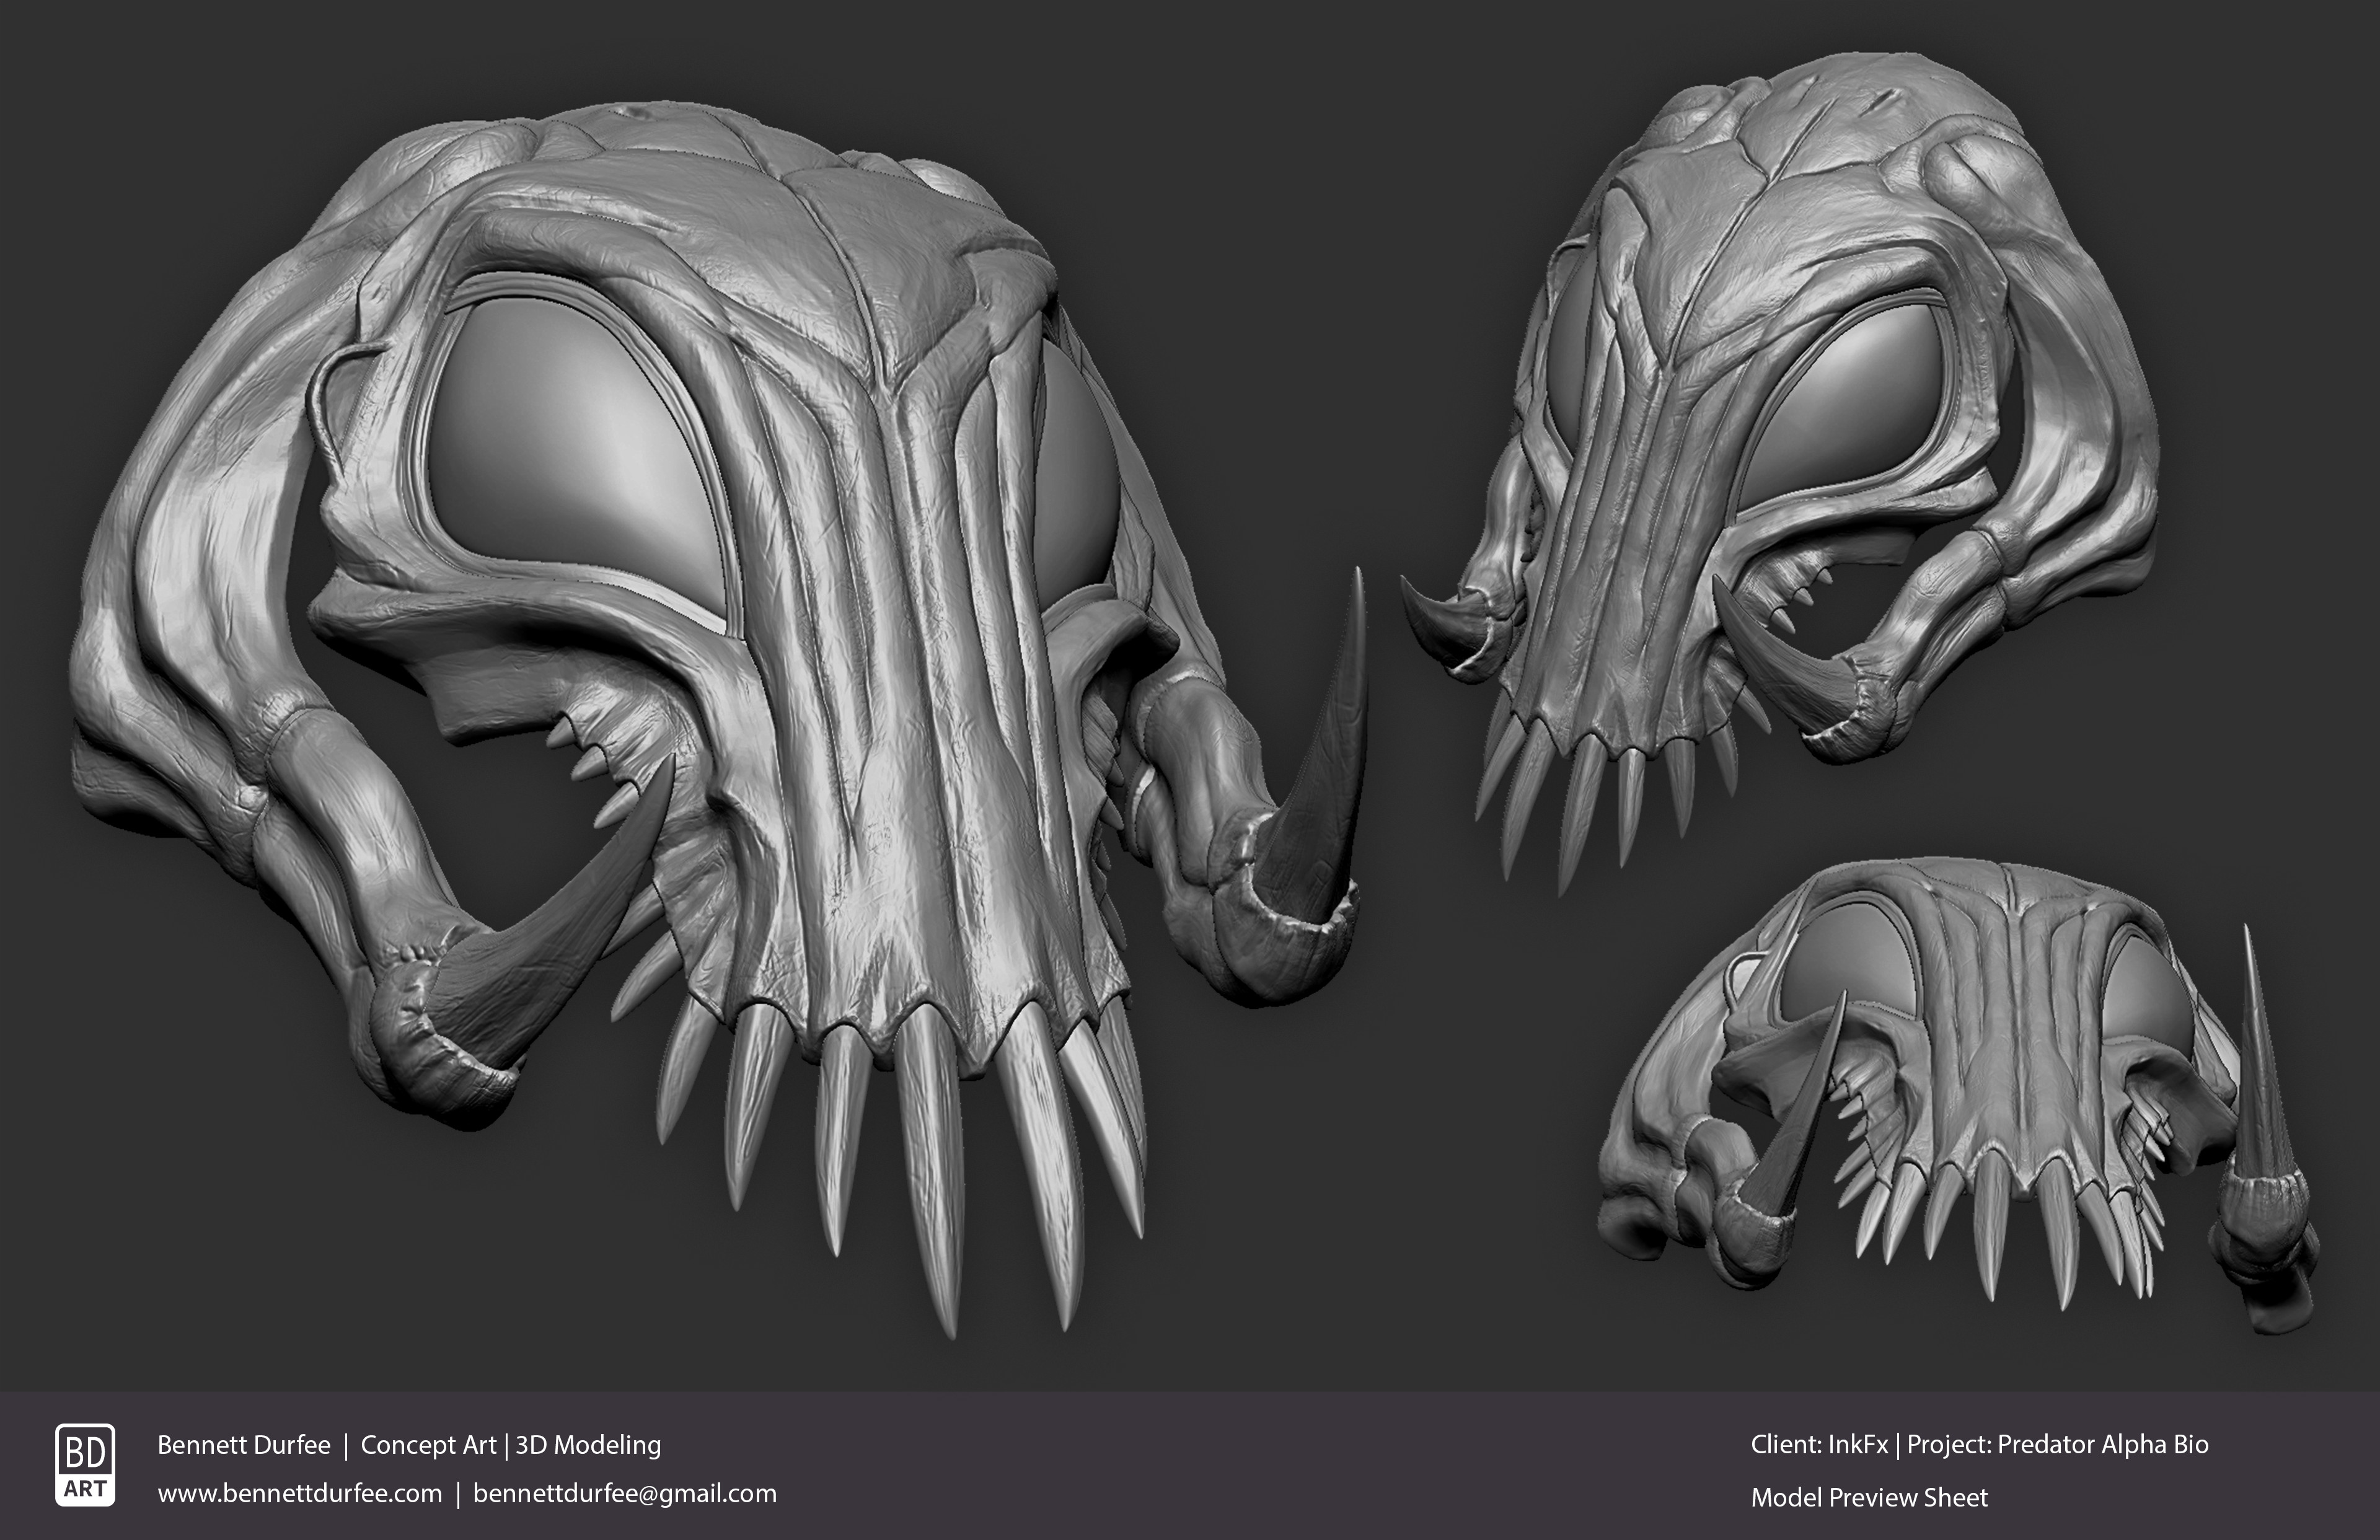 Preview Sheet with BPR Renders from Zbrush